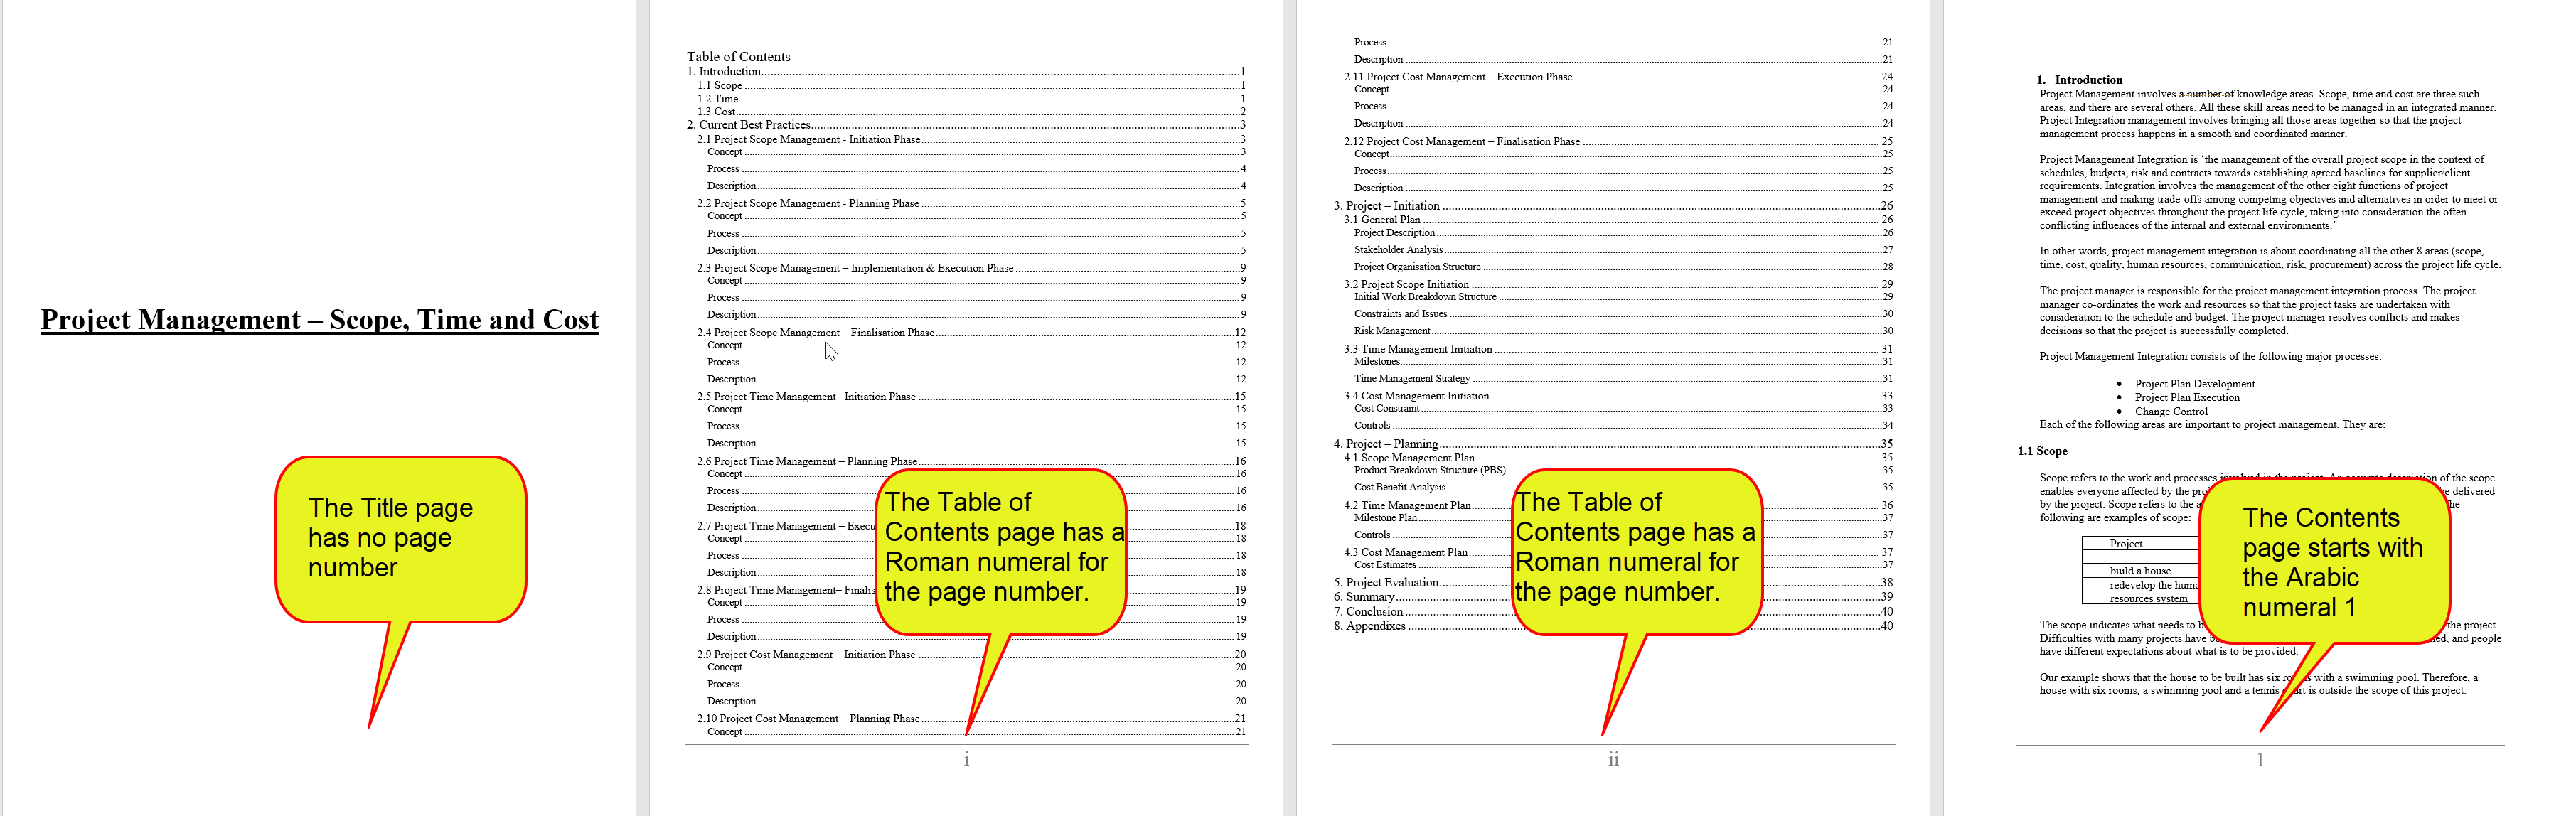 Example of a piece of academic writing with the Title Page having no page number, with the Table of Contents having page numbers ii to iii, and the main text starting with page number 1.